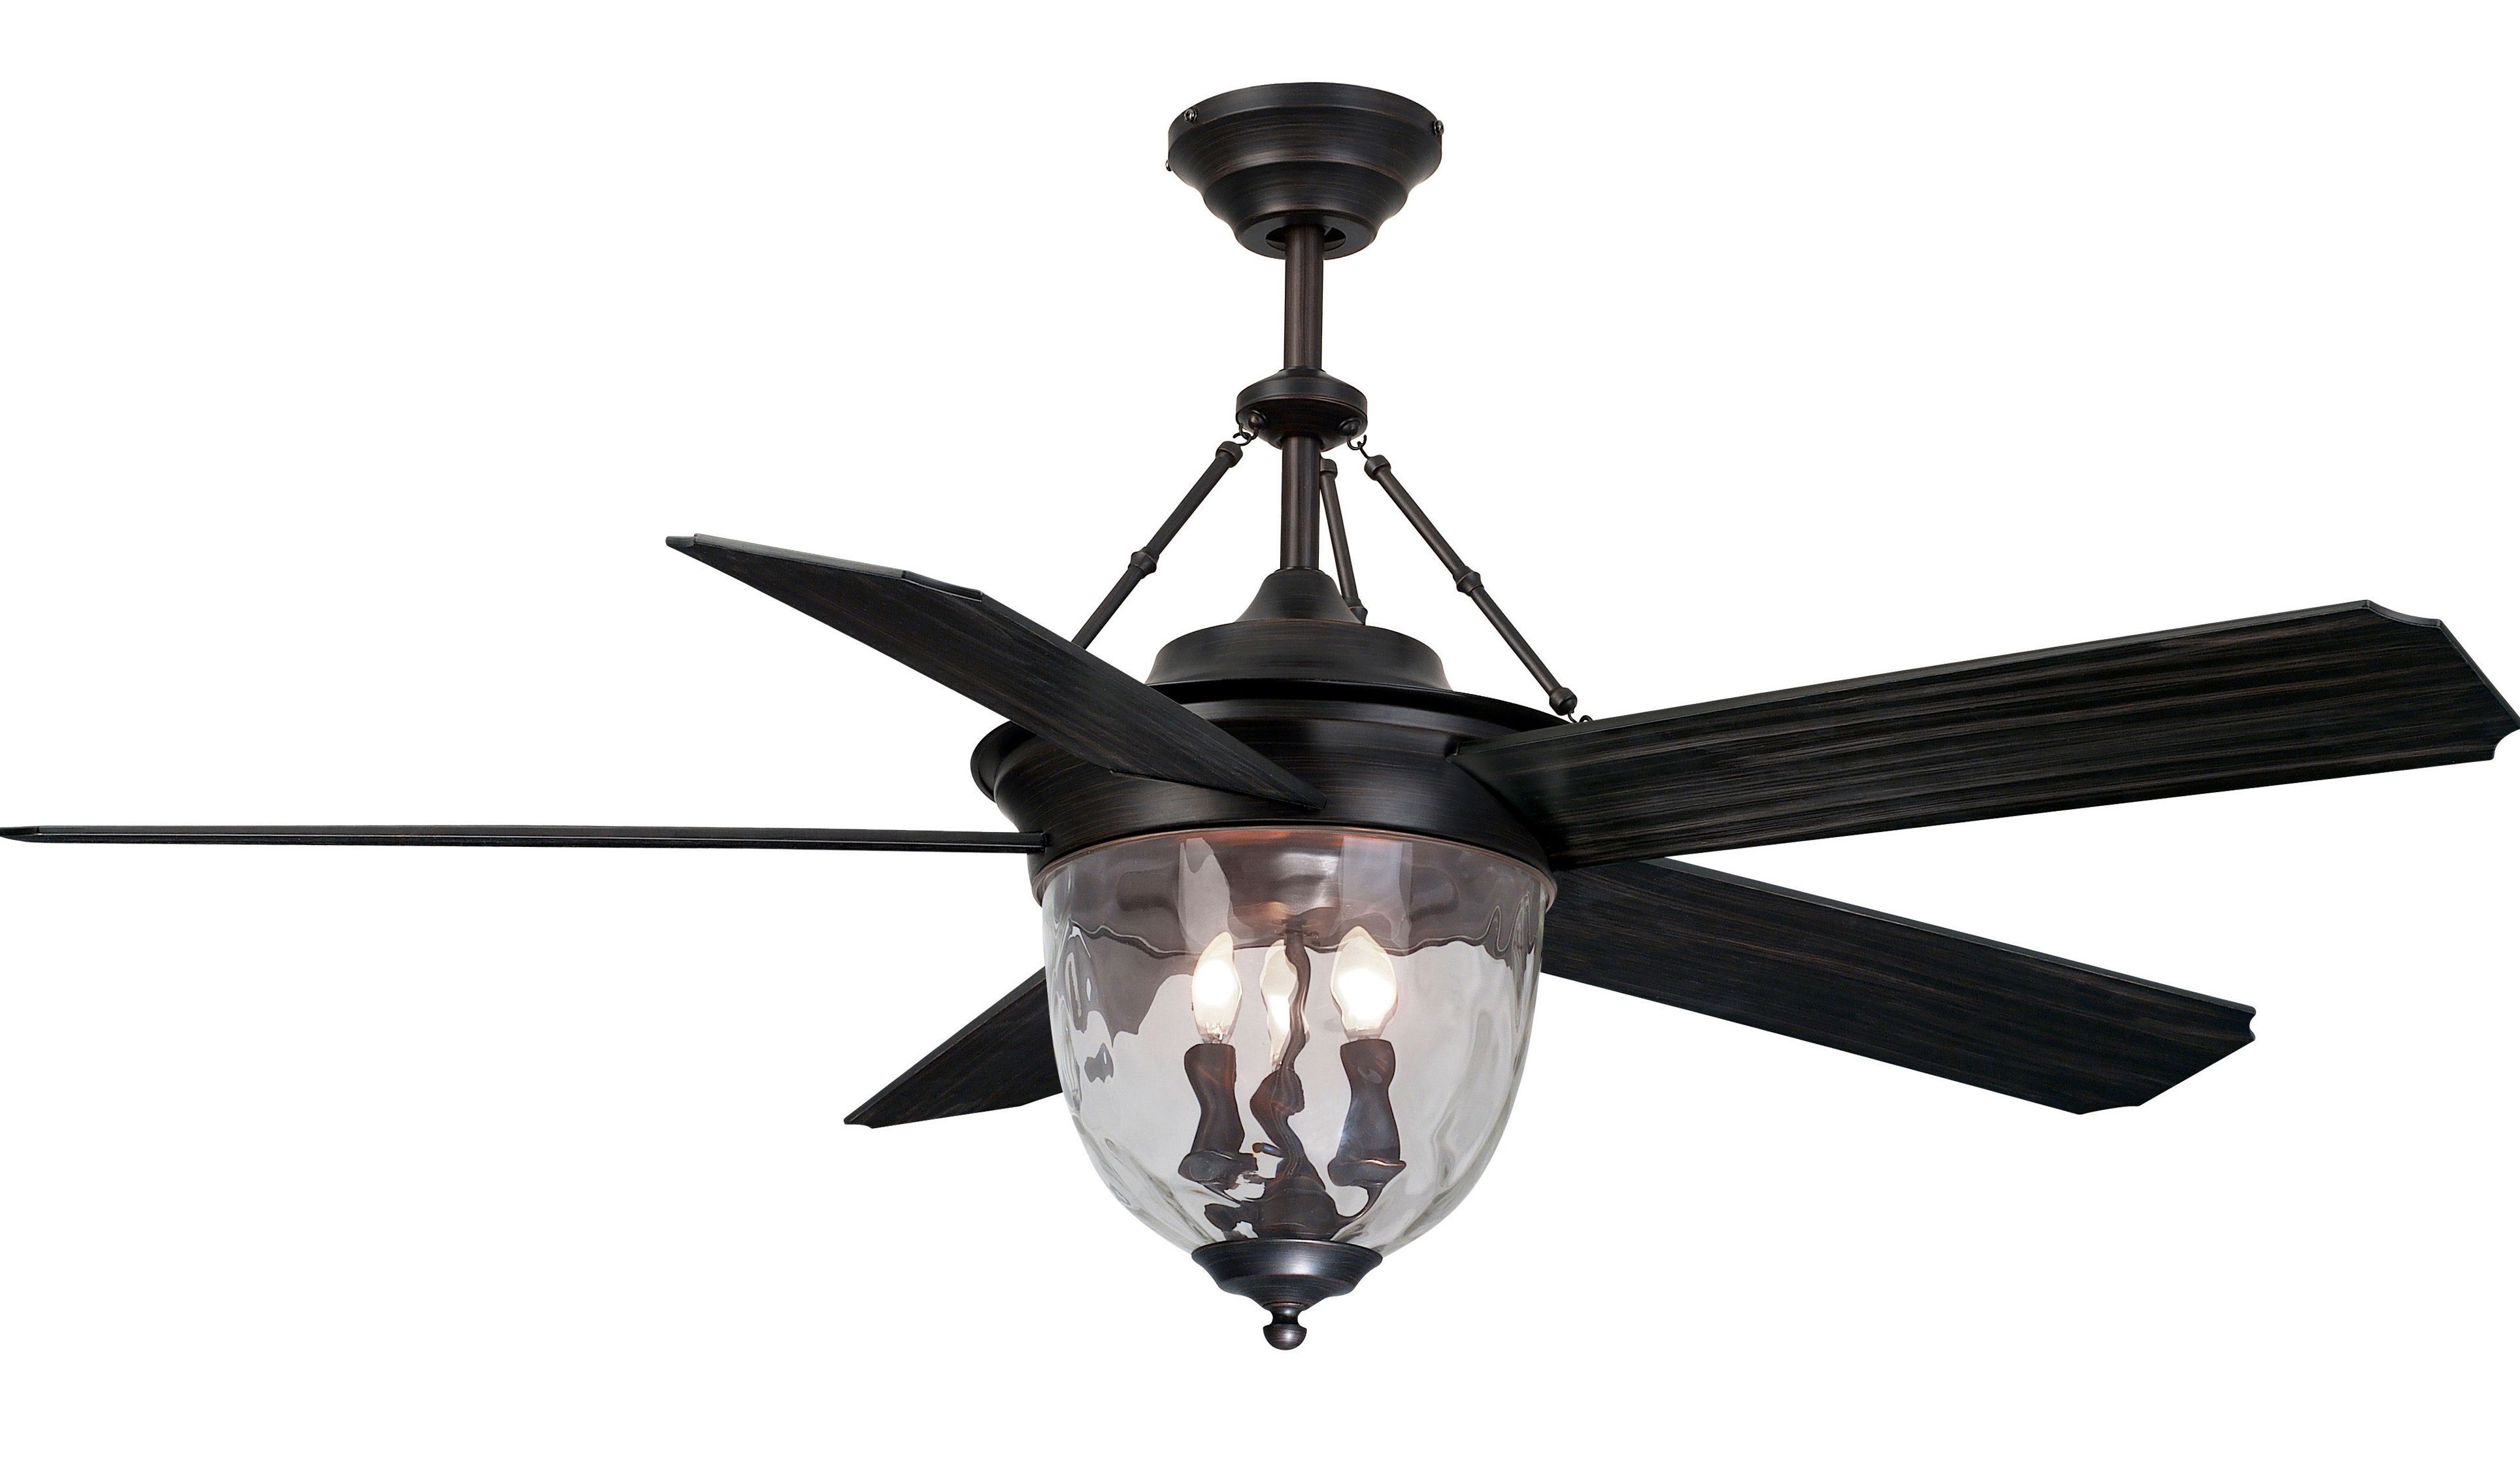 Most Recent Outdoor Ceiling Fans With Light And Remote Inside Ceiling: Amusing Lowes Ceiling Fans With Lights Outdoor Ceiling Fan (View 14 of 20)